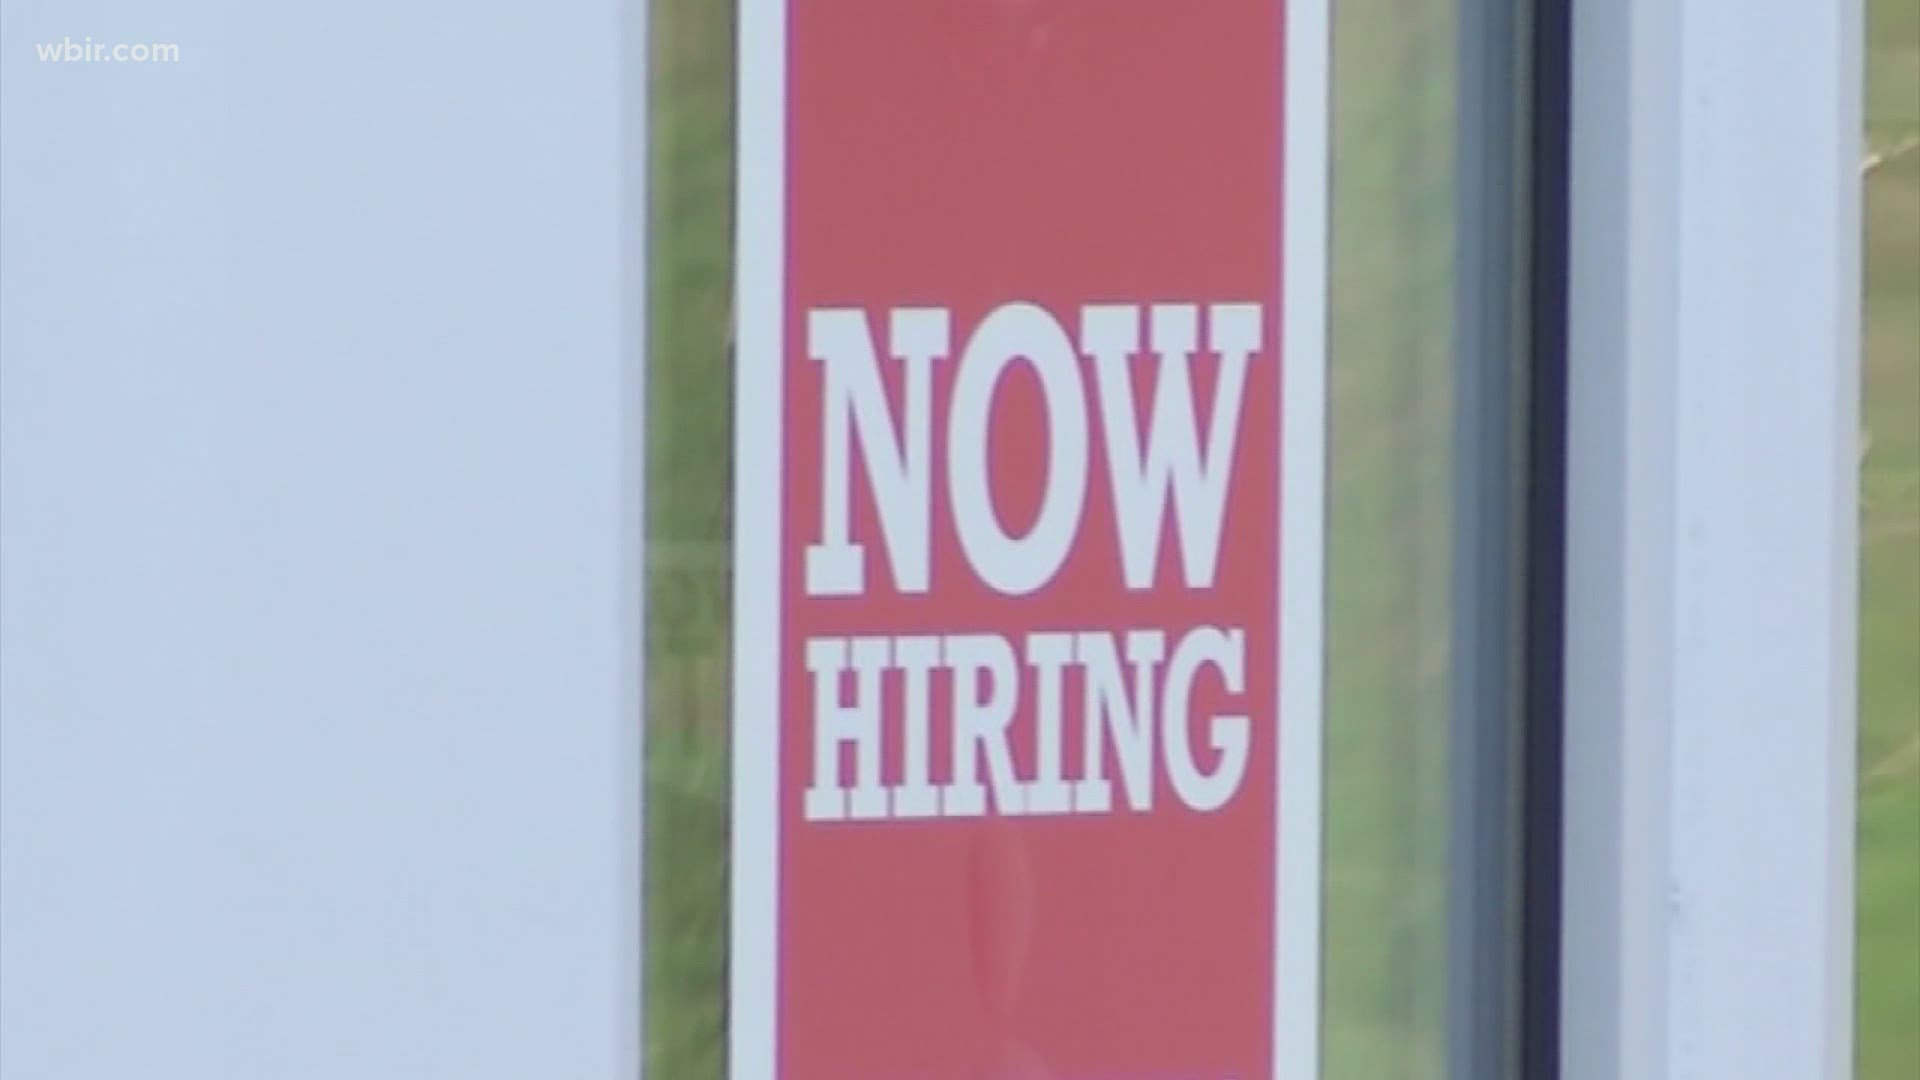 Some Tennessee lawmakers are saying that the number of available jobs that Governor Bill Lee said people can apply for has been exaggerated.